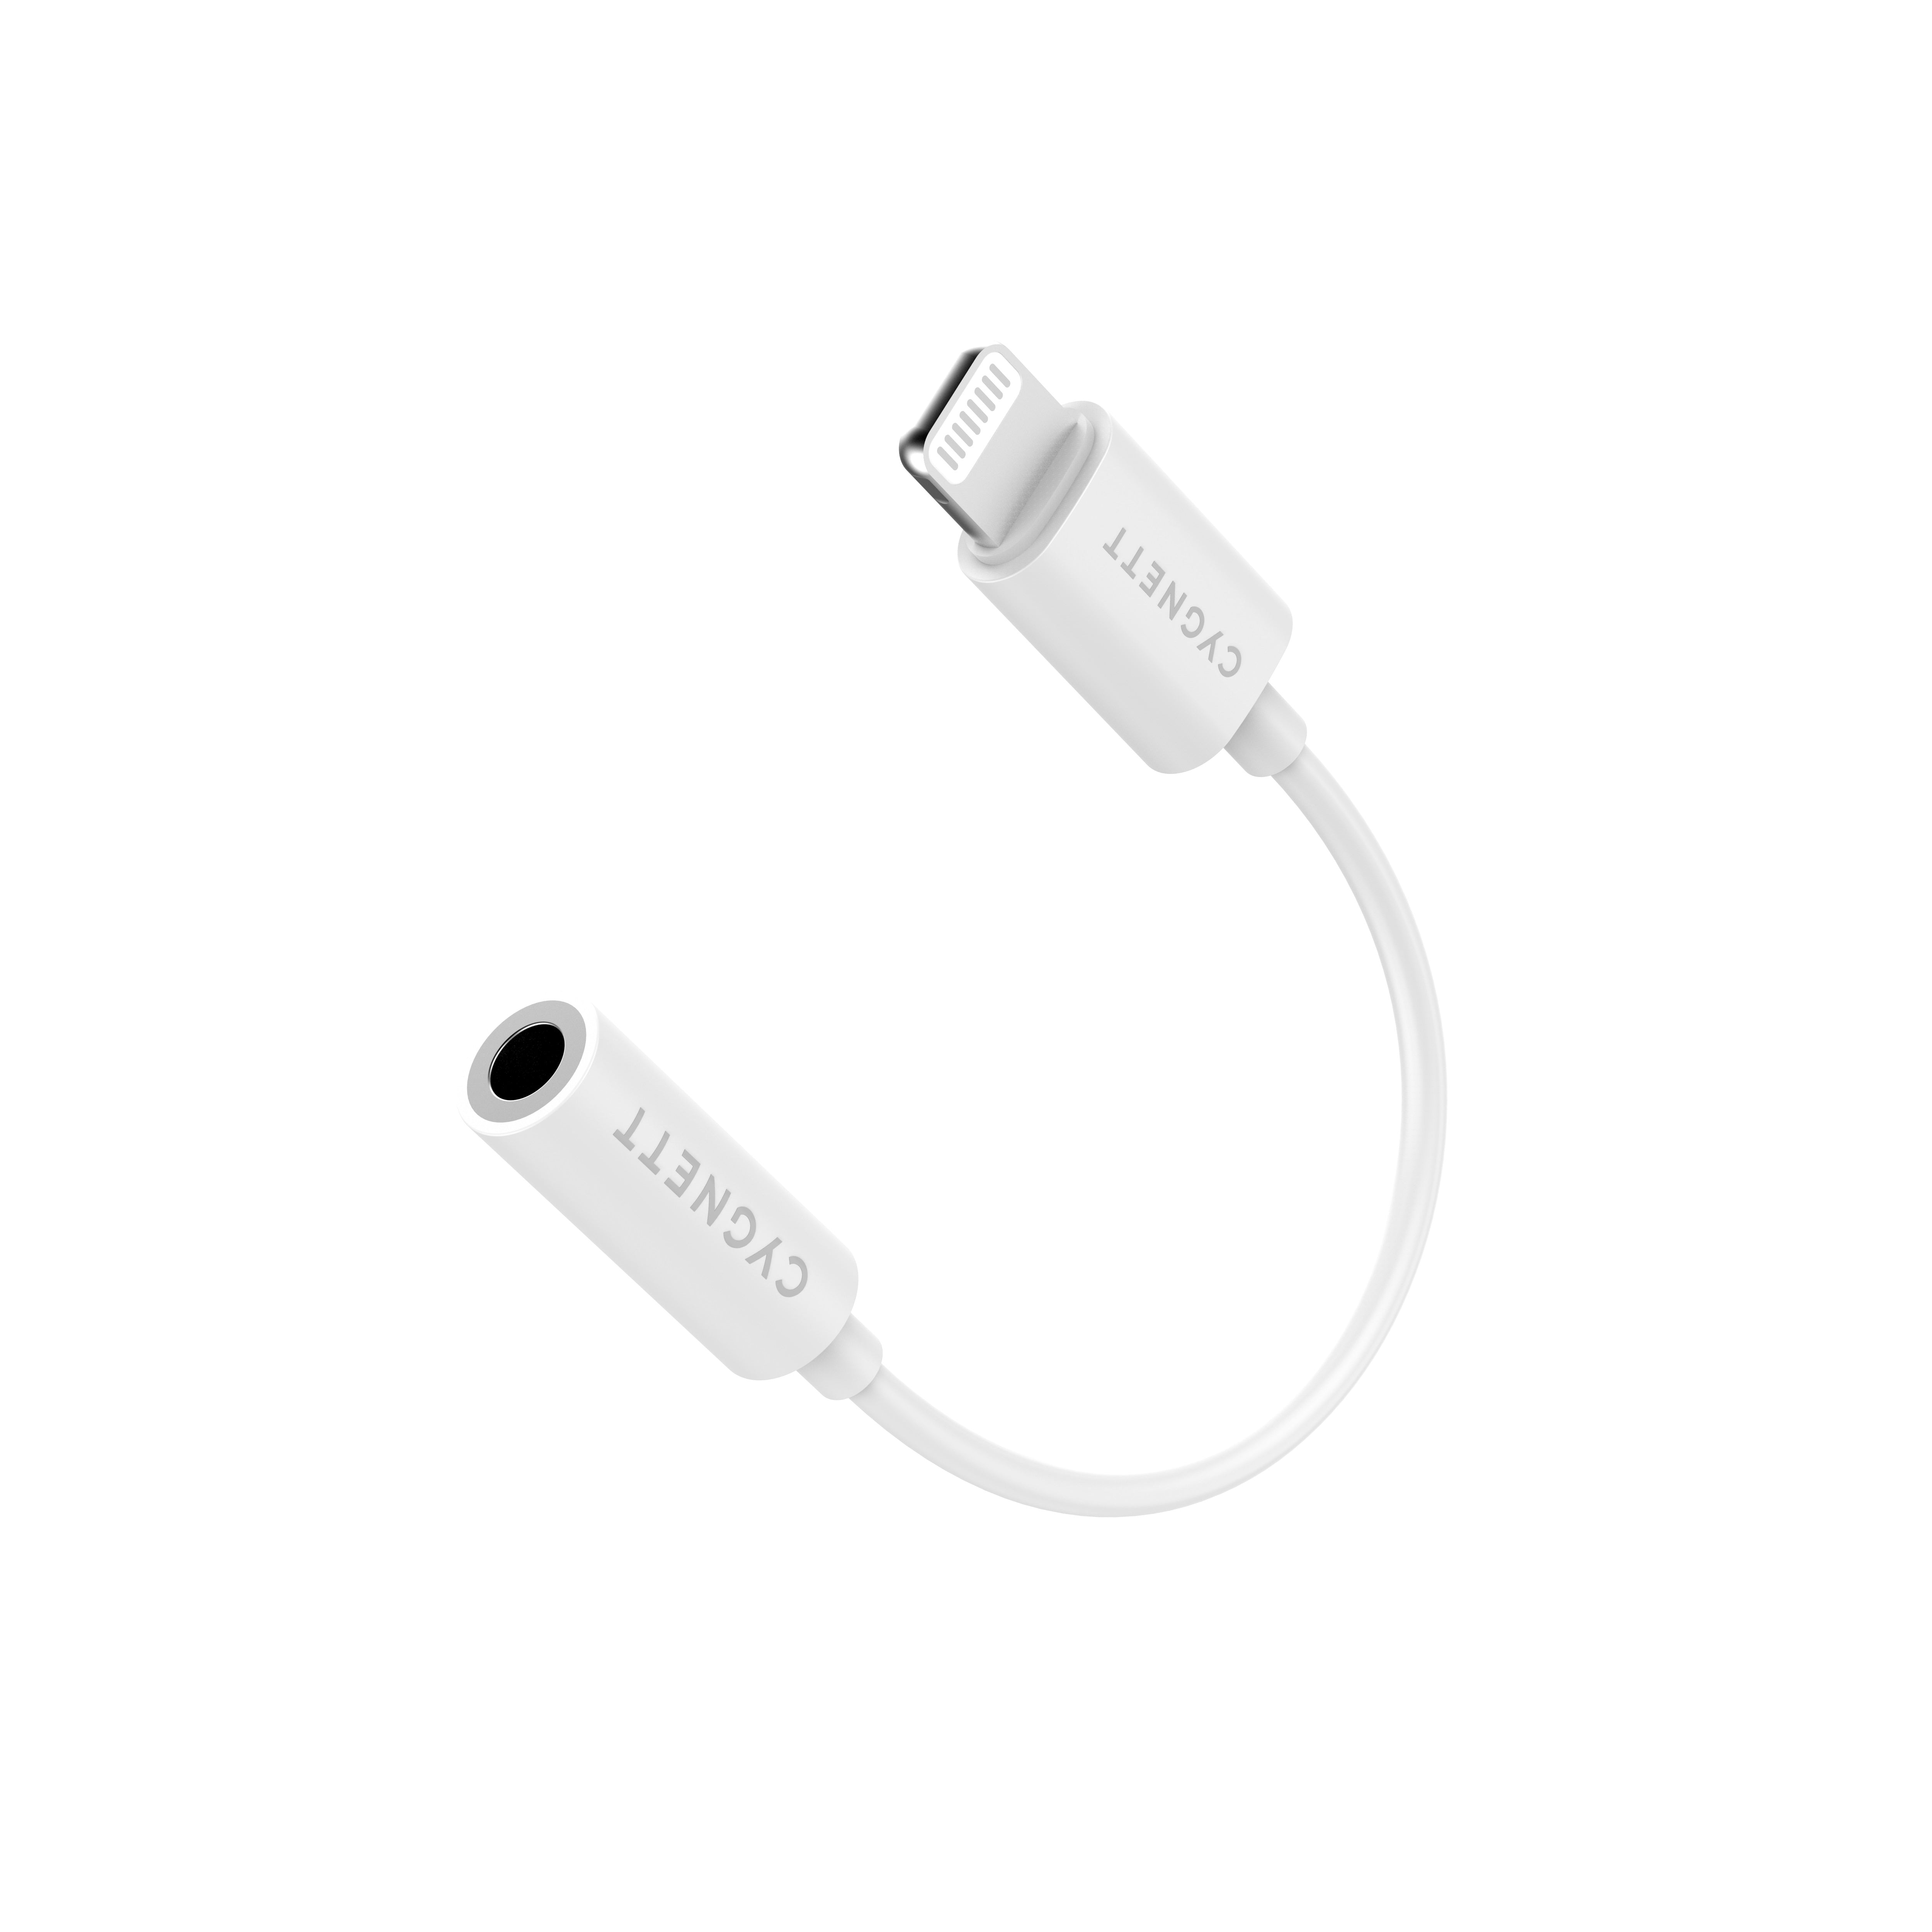 Cygnett Essentials Lightning to 3.5mm AUX Audio Cable Adapeter - White (CY3629PCCPD), Best for iPhone, iPad & iPod, Versatile Connectivity